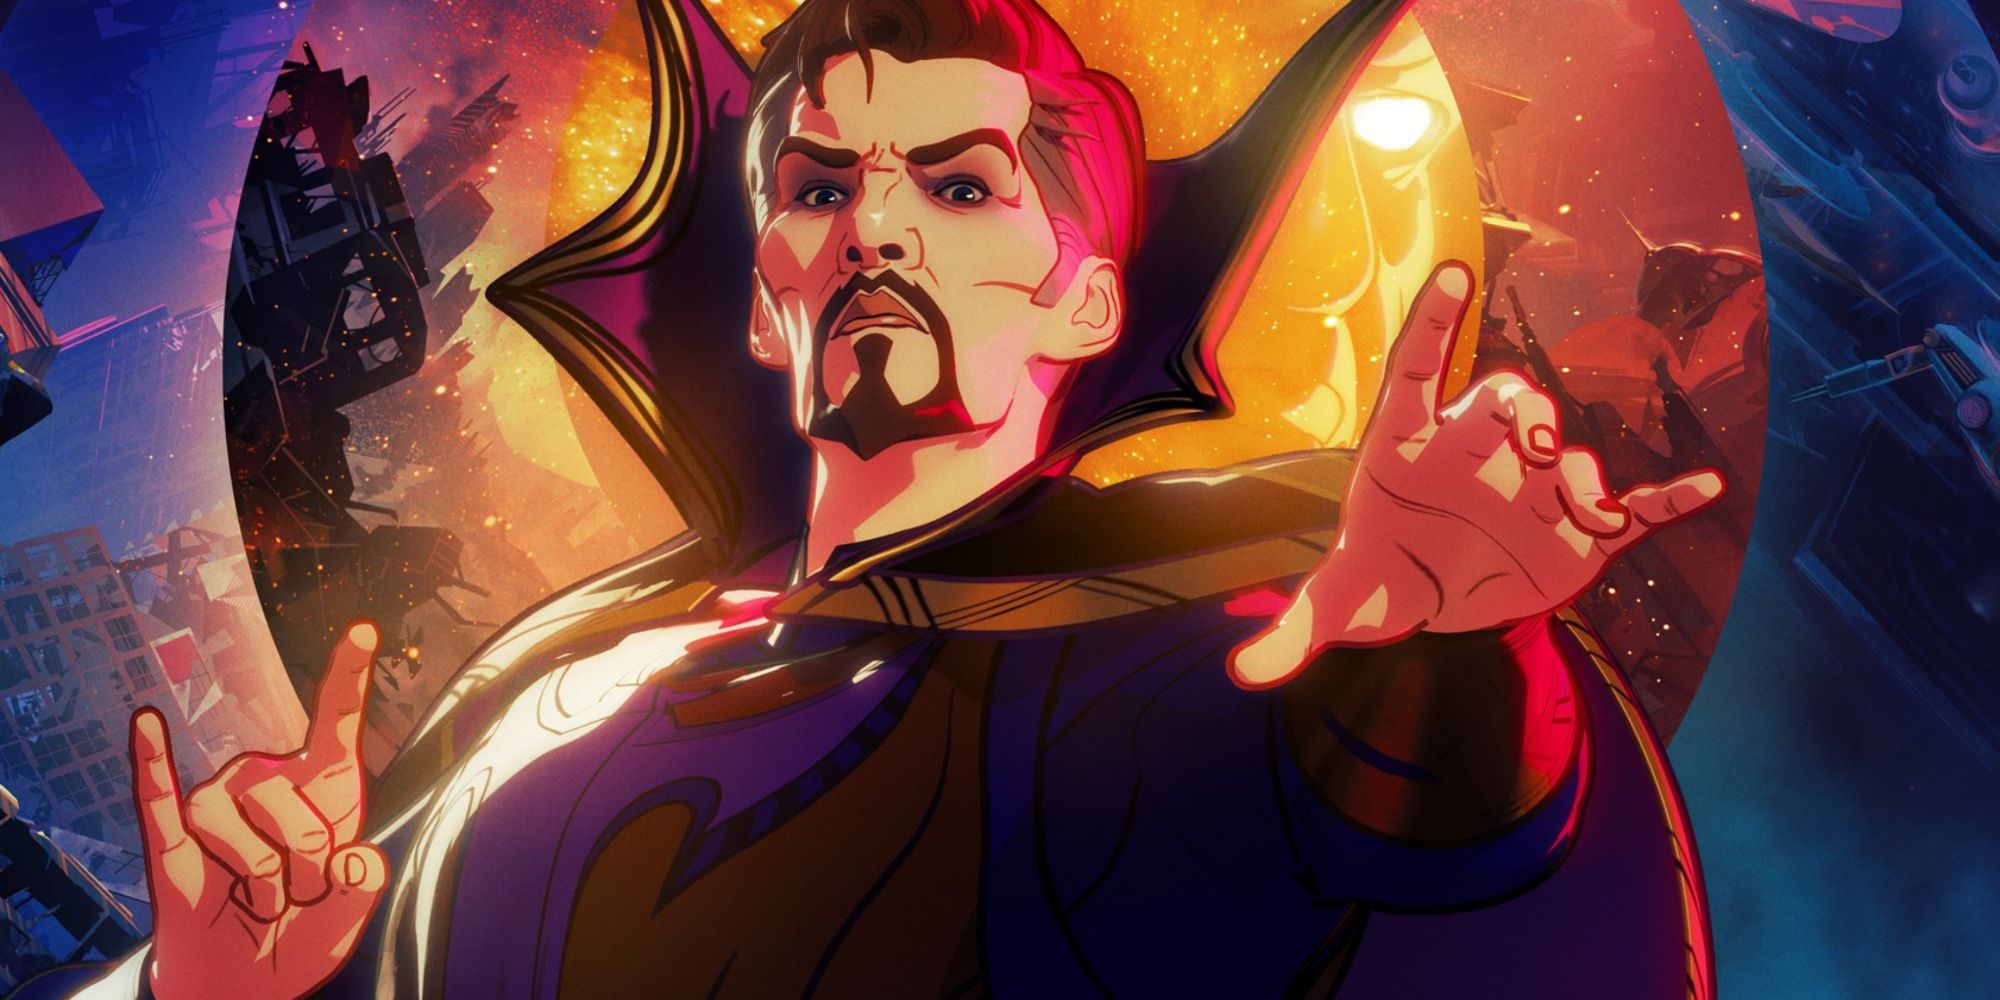 How about Doctor Strange from Marvel...?  He prepares to do sorcery.